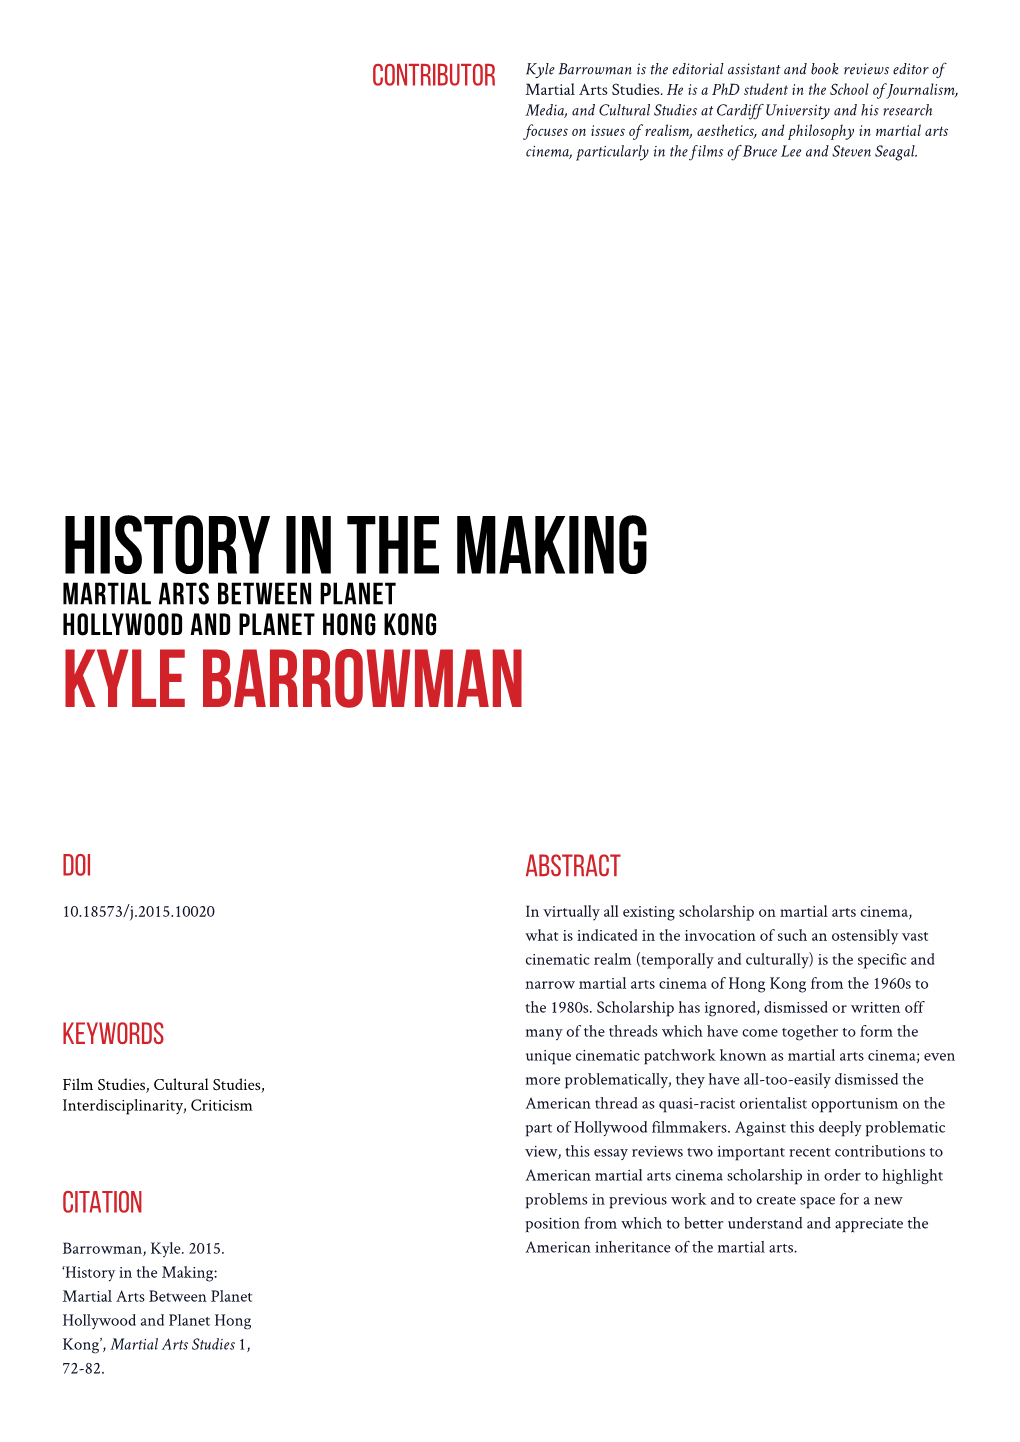 History in the Making Kyle Barrowman